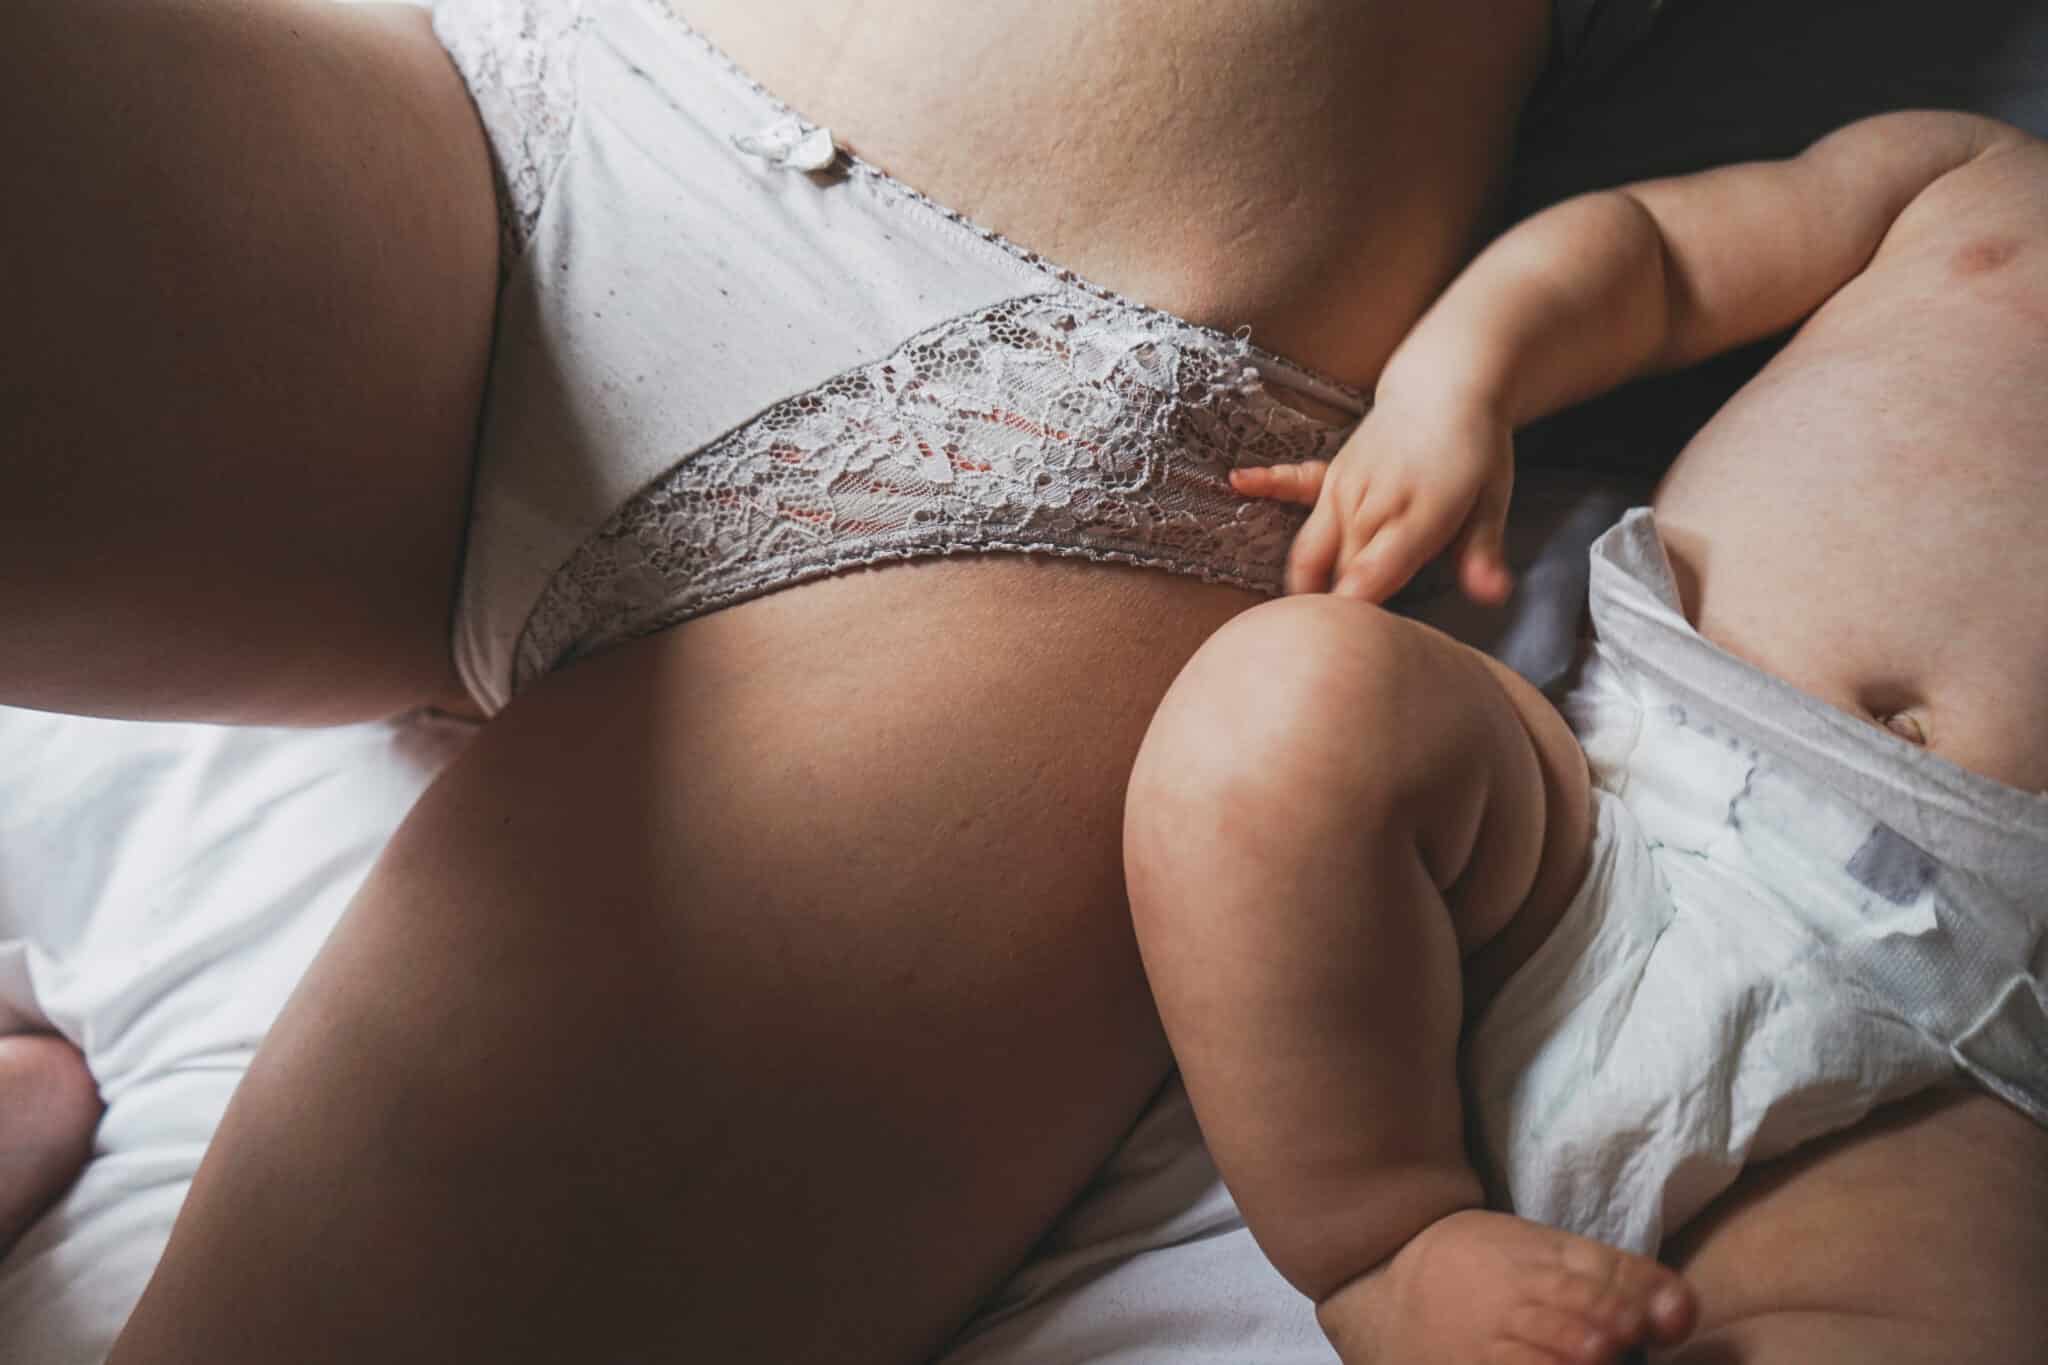 Real Image Of A Woman And Her Baby At Postpartum Recovery